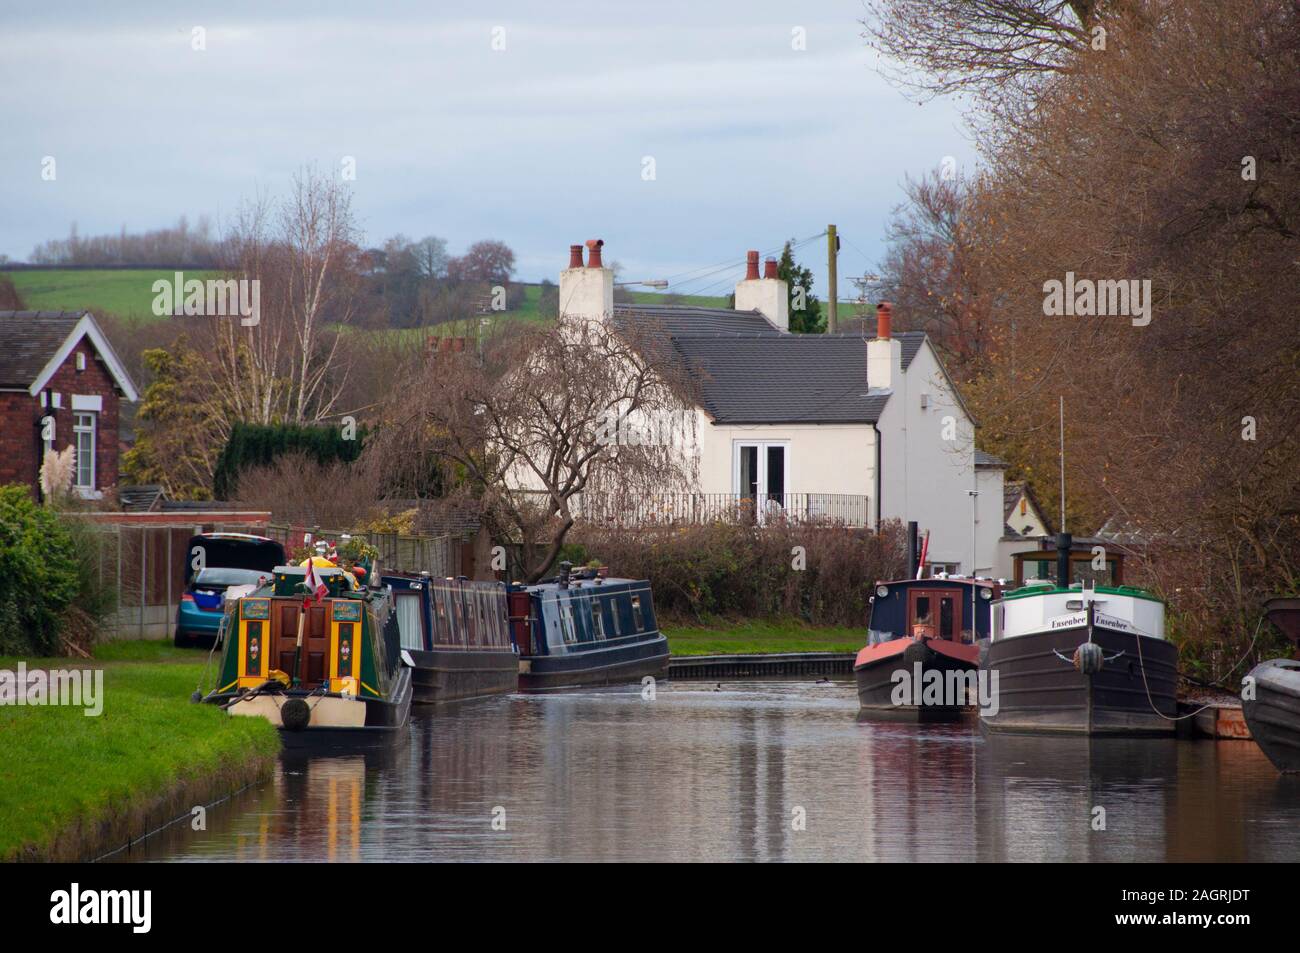 The canal in Stone Staffordshire England UK Stock Photo